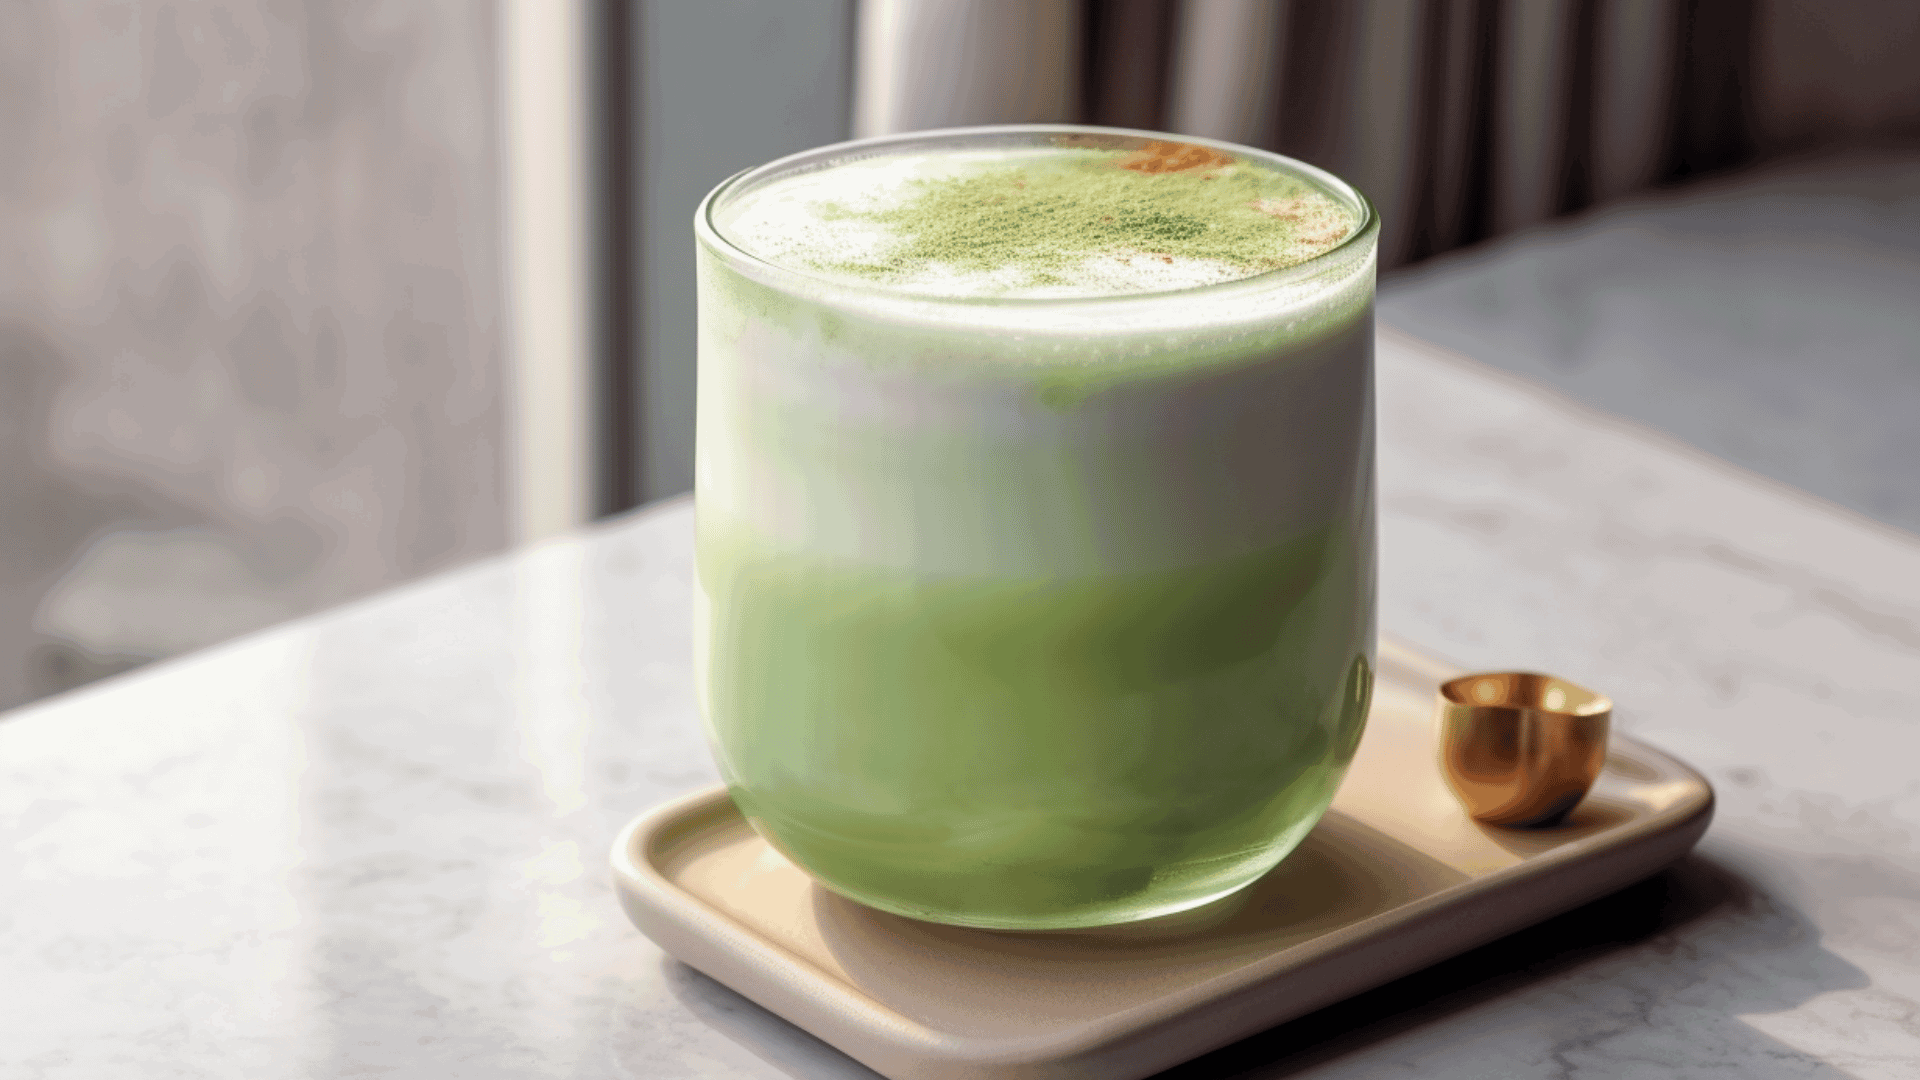 What Is Matcha? And Is It Healthy?